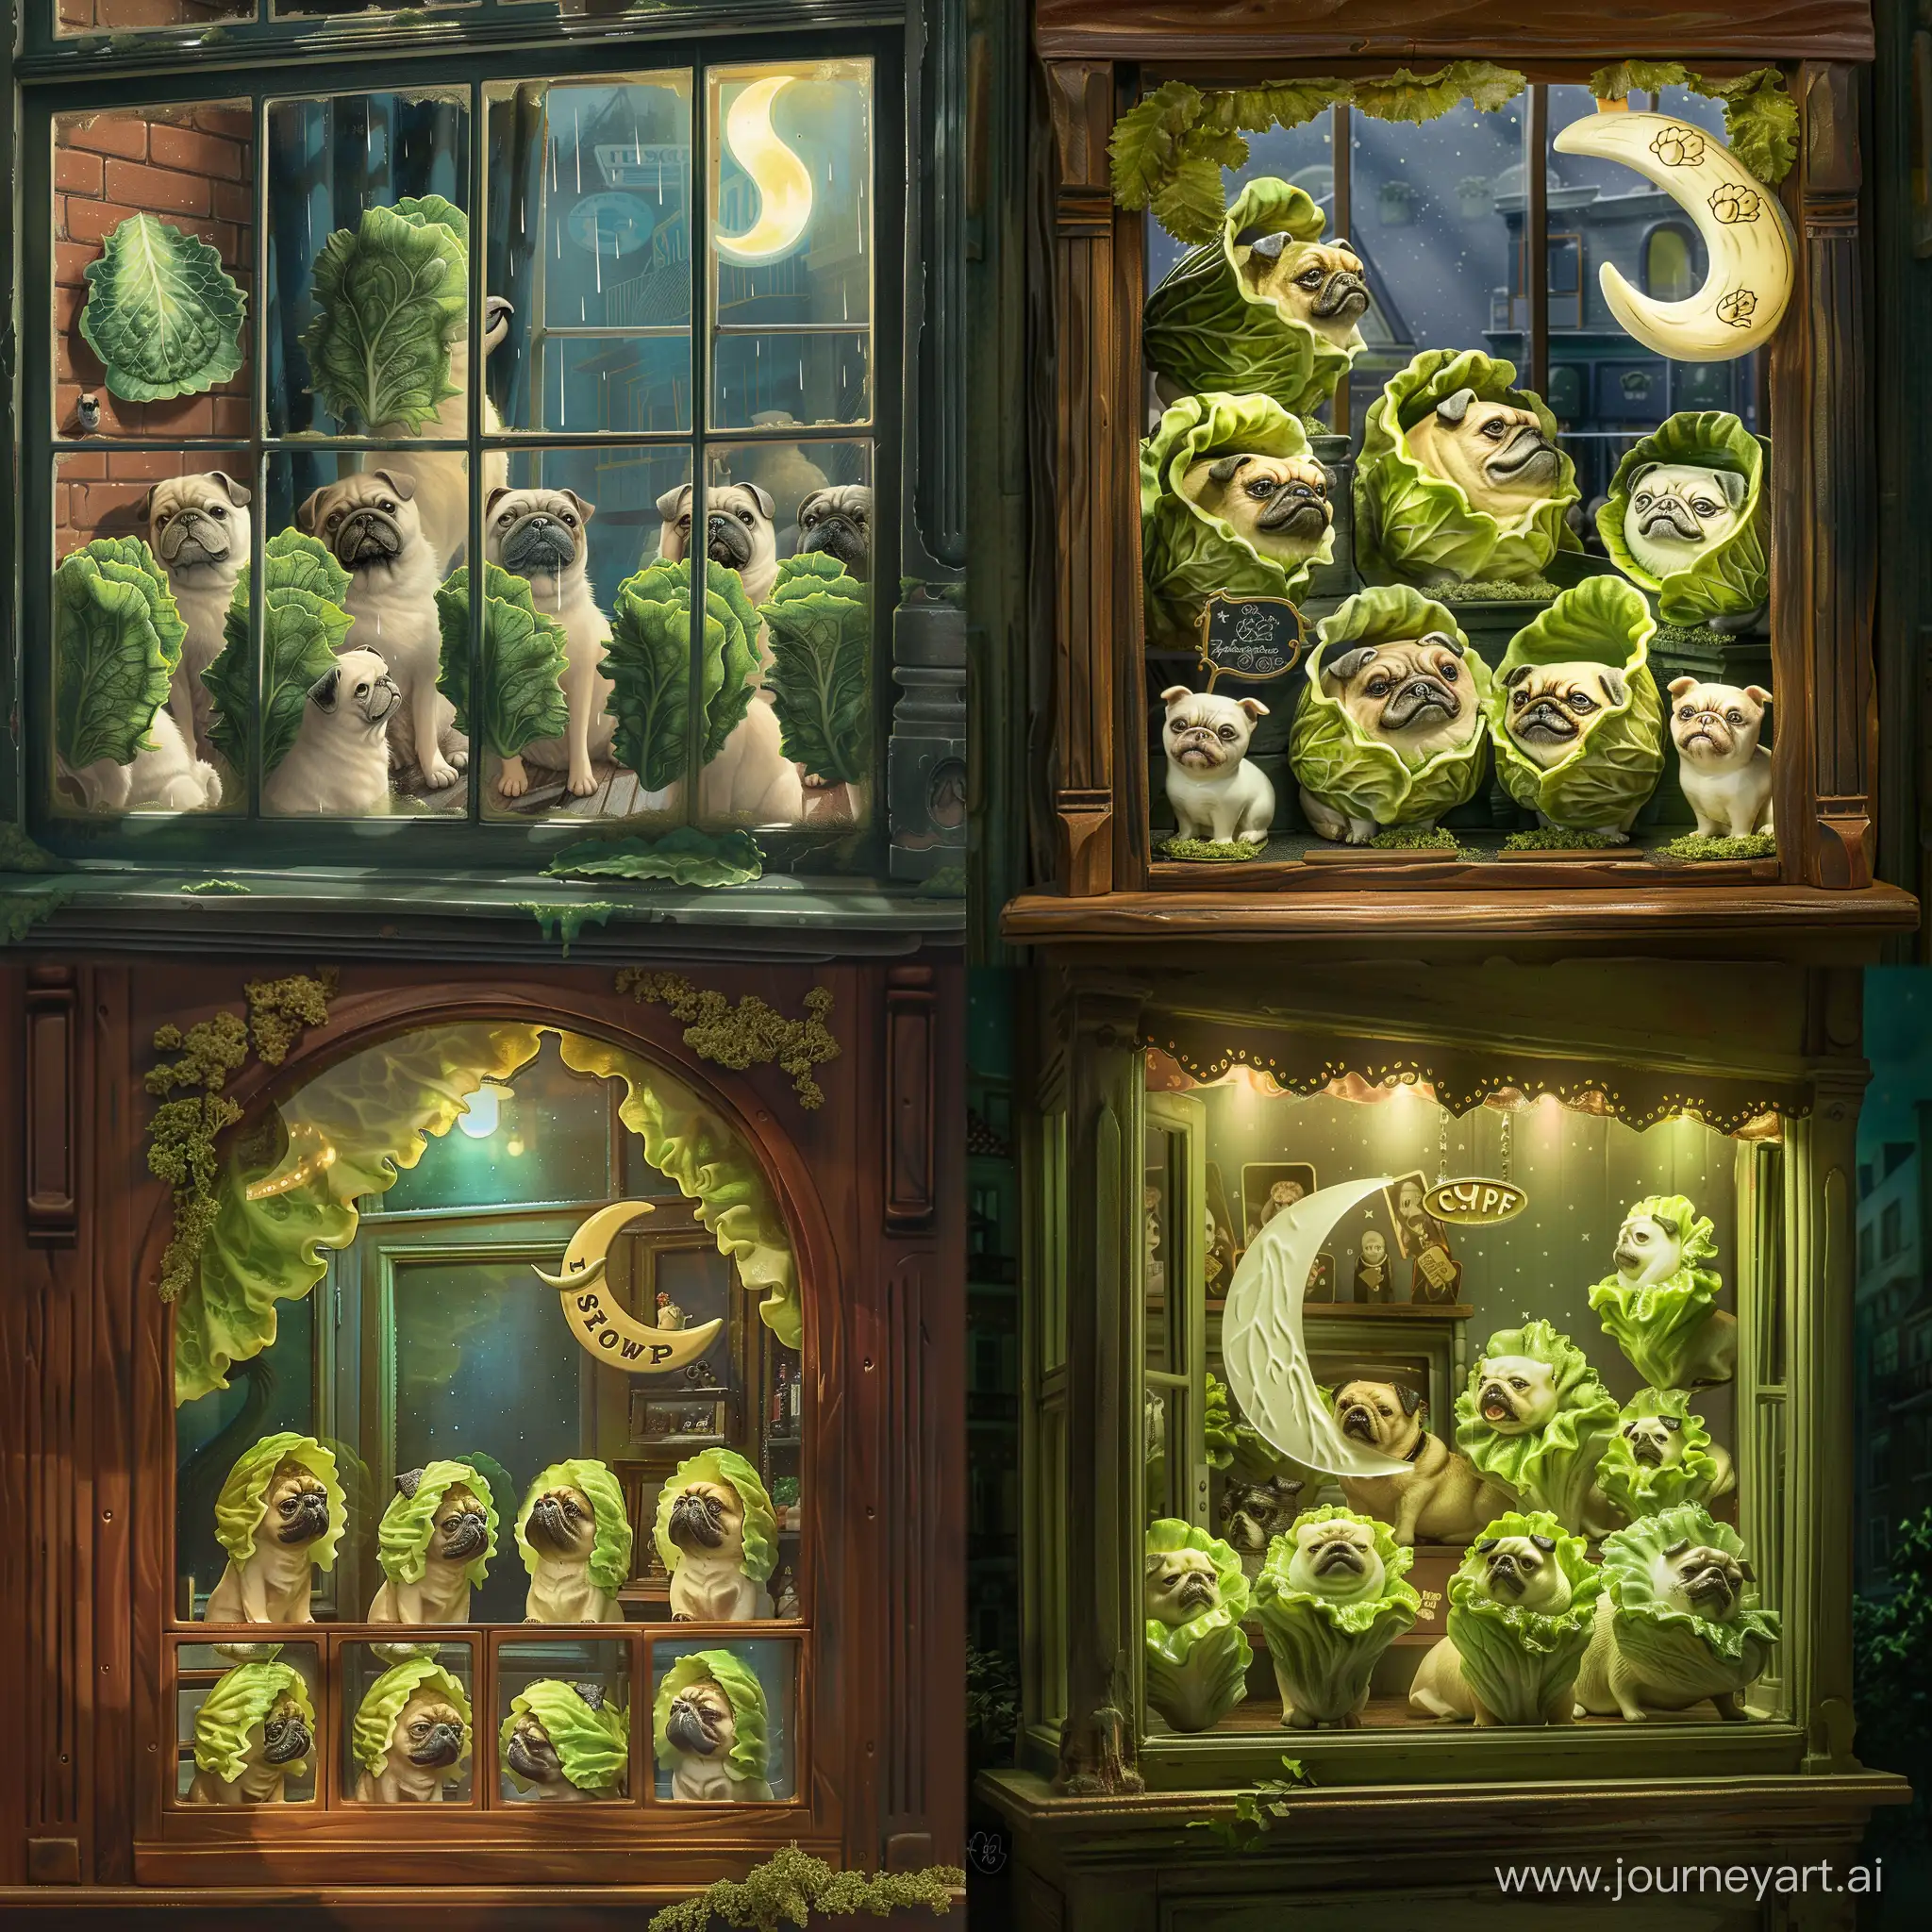 dog looking into store window, window display of seven porcelain dog statues, dog figurines, grumpy lettuce pug dogs, crescent moon, illustration, semi-realistic, store has sign shaped like lettuce, dog store